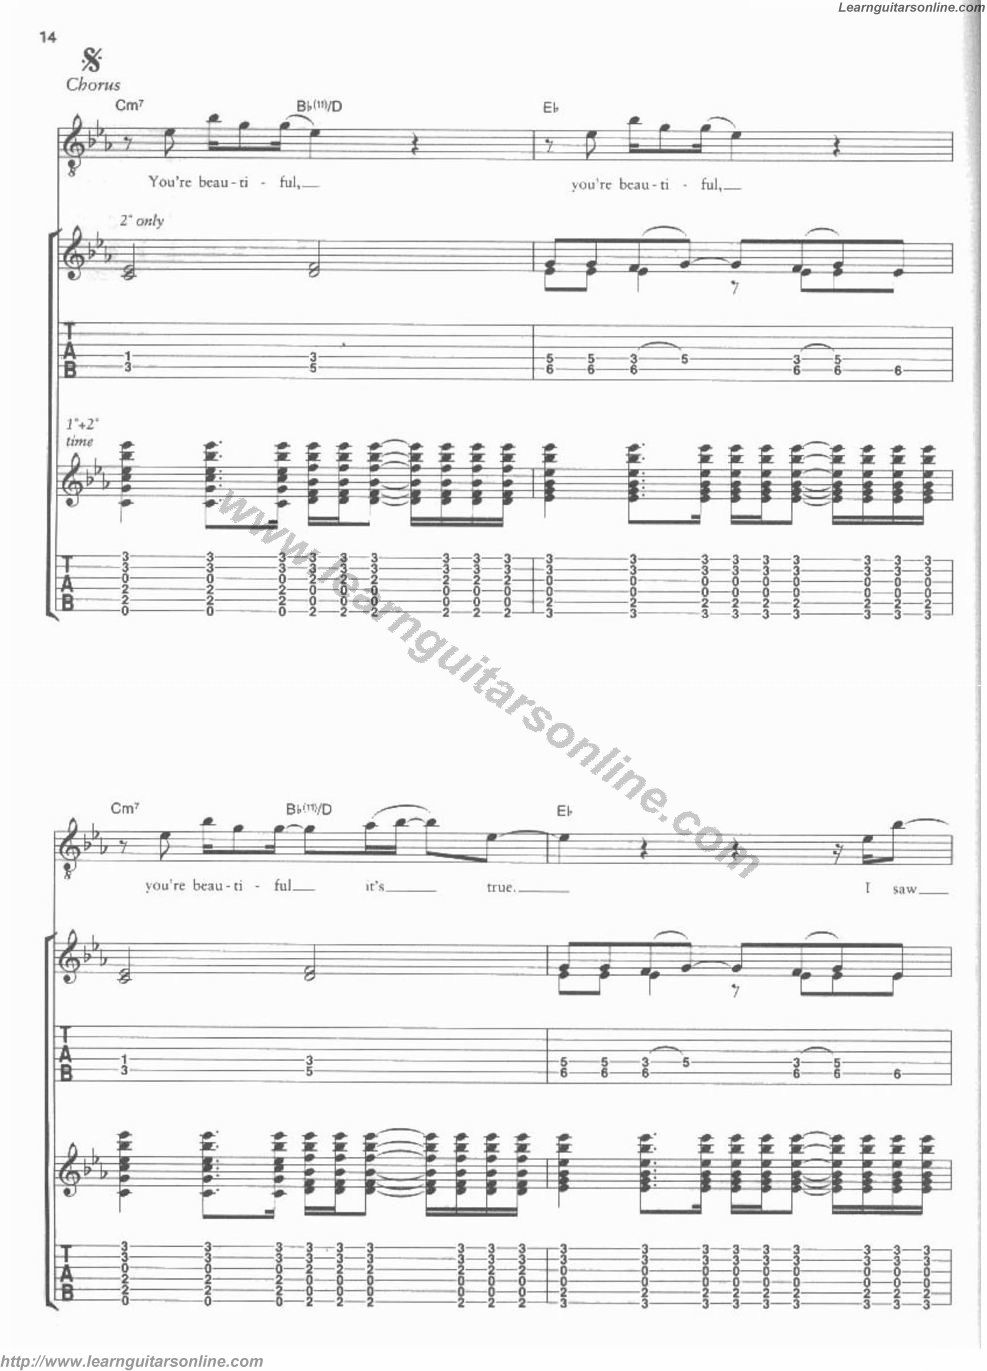 You are beautiful by James Blunt Guitar Sheet Music Free